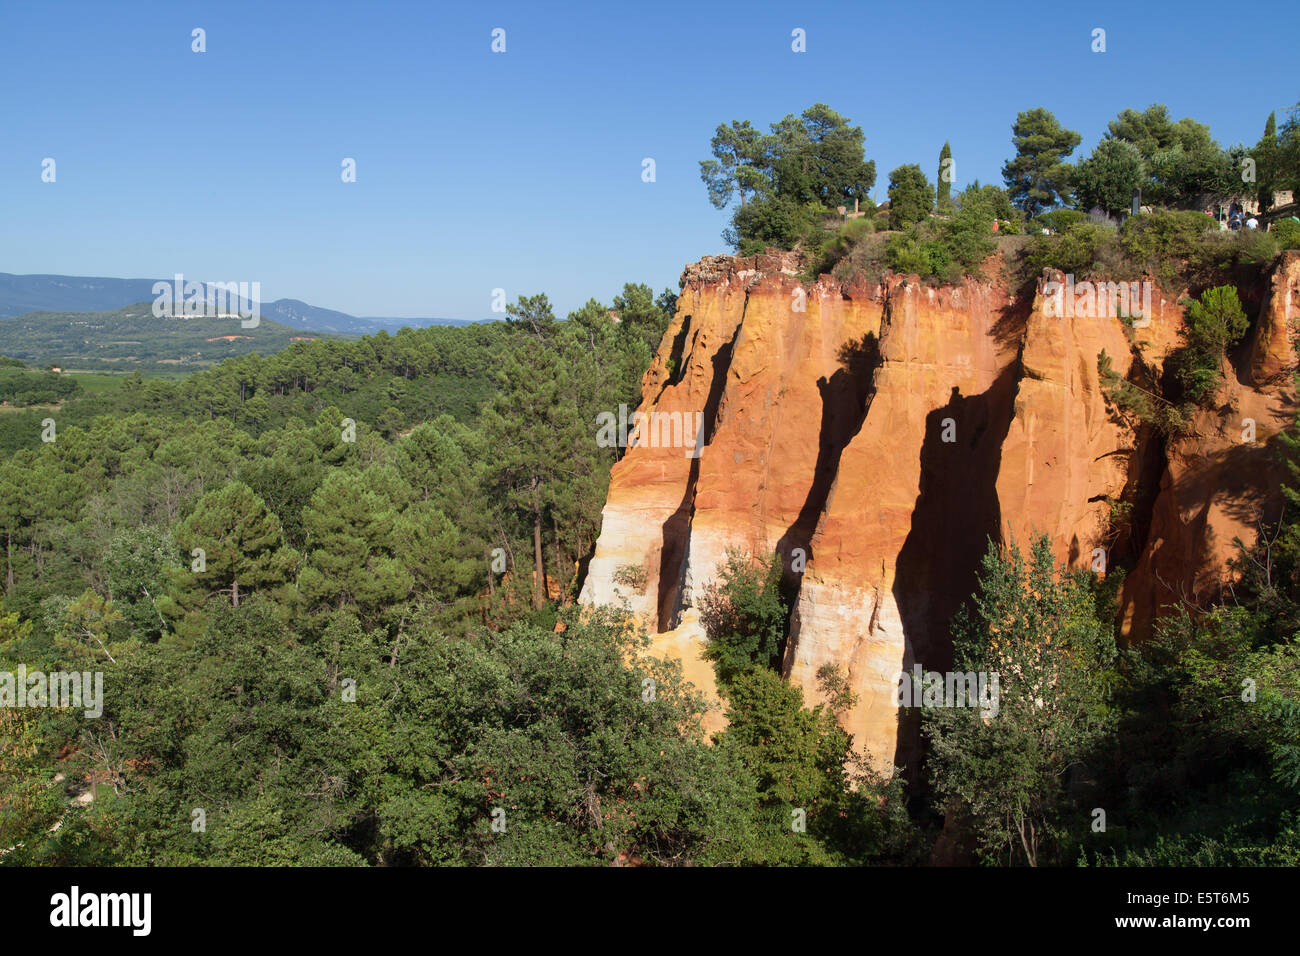 Ochre cliffs in Roussillon, Luberon, Provence, France. Stock Photo